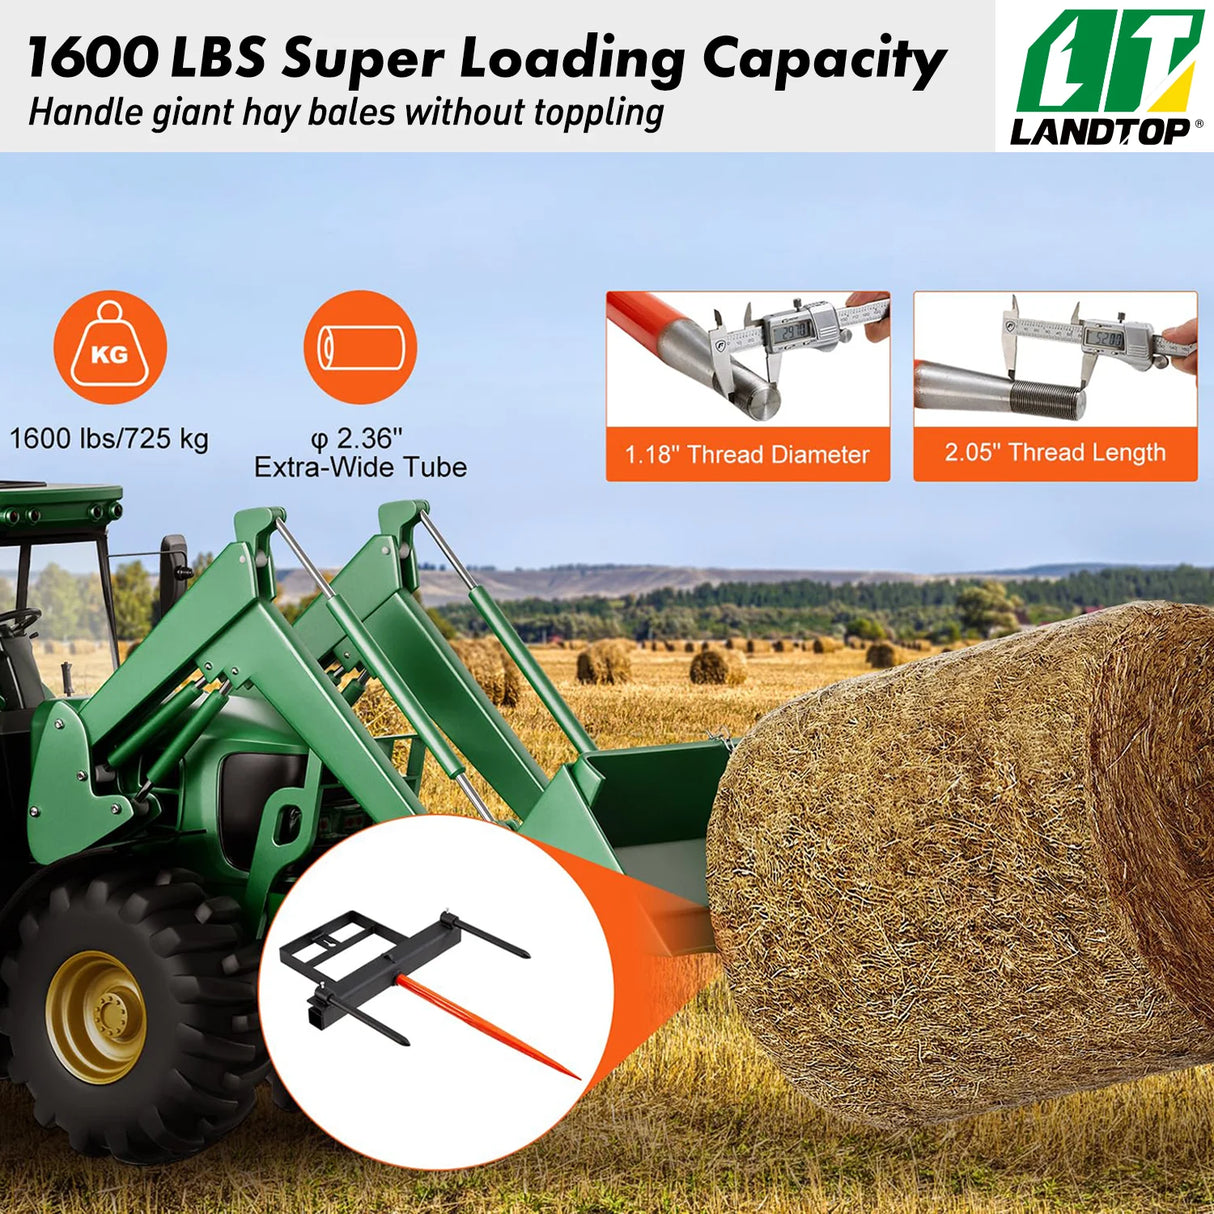 39" Hay Spear, Bale Spears 1600lbs Loading Capacity, Skid Steer Loader Tractor Bucket Attachment with 2pcs 17.5" Stabilizer Spears and 60" Chain, Quick Attach Spike Forks